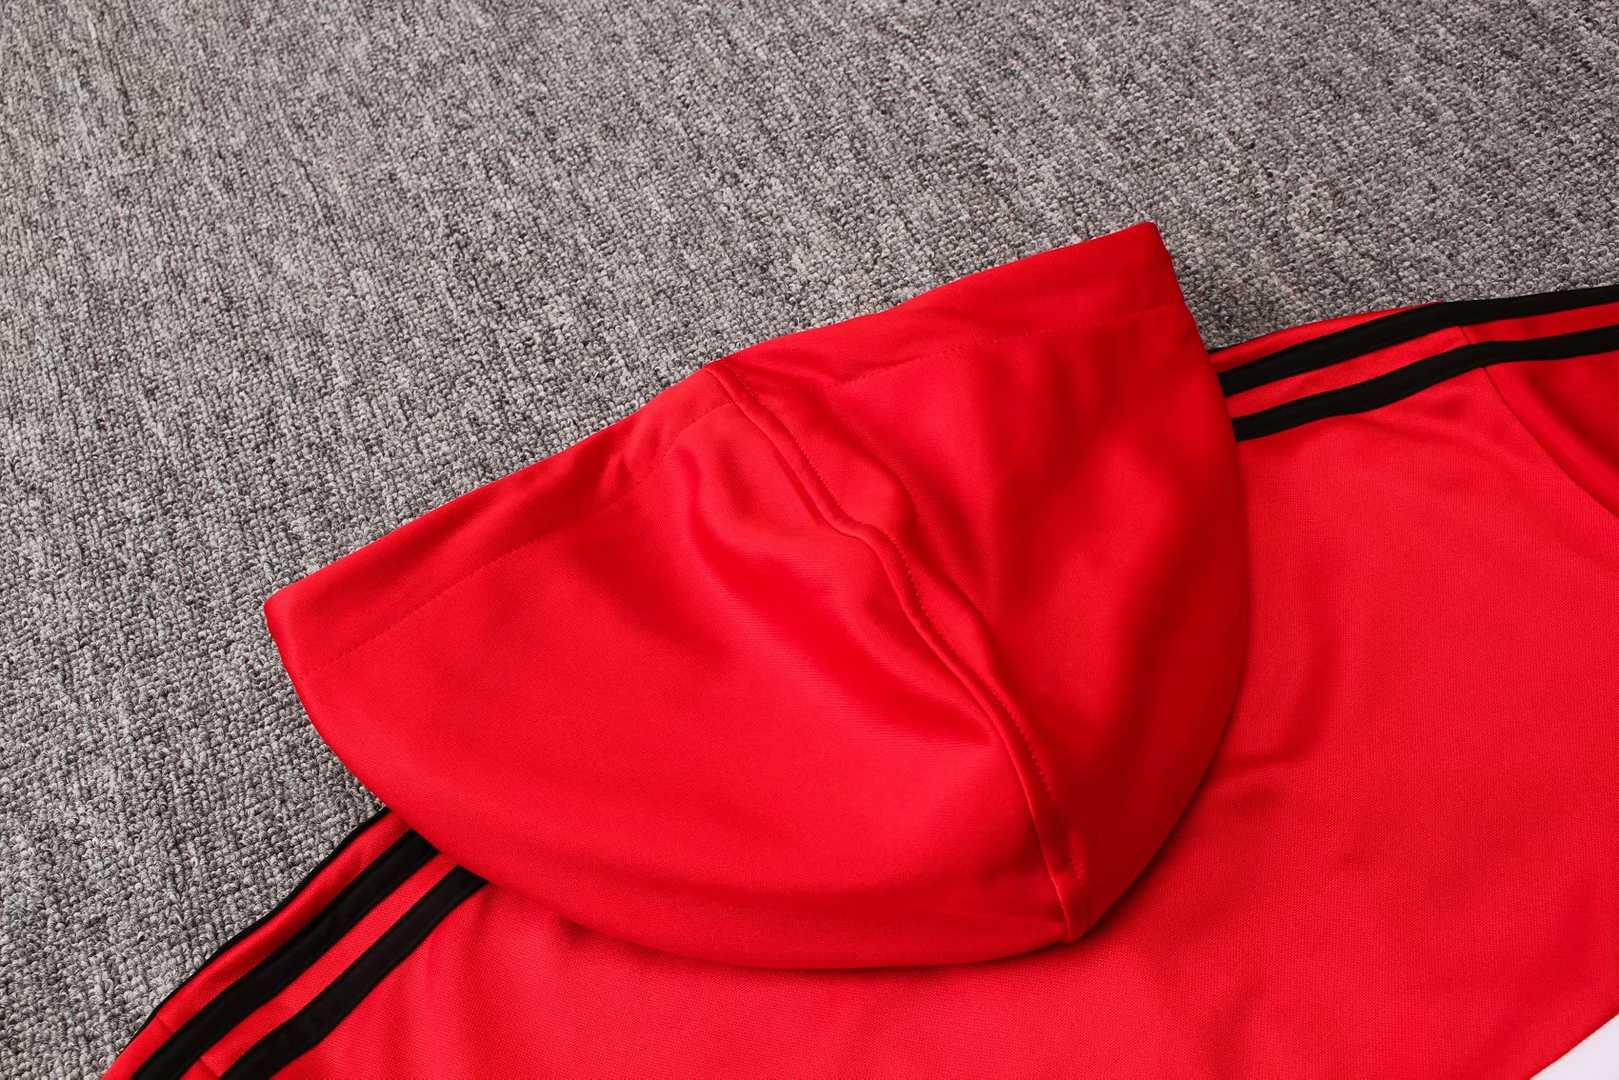 2019/20 Manchester United Hoodie Red Mens Soccer Training Suit(Jacket + Pants)